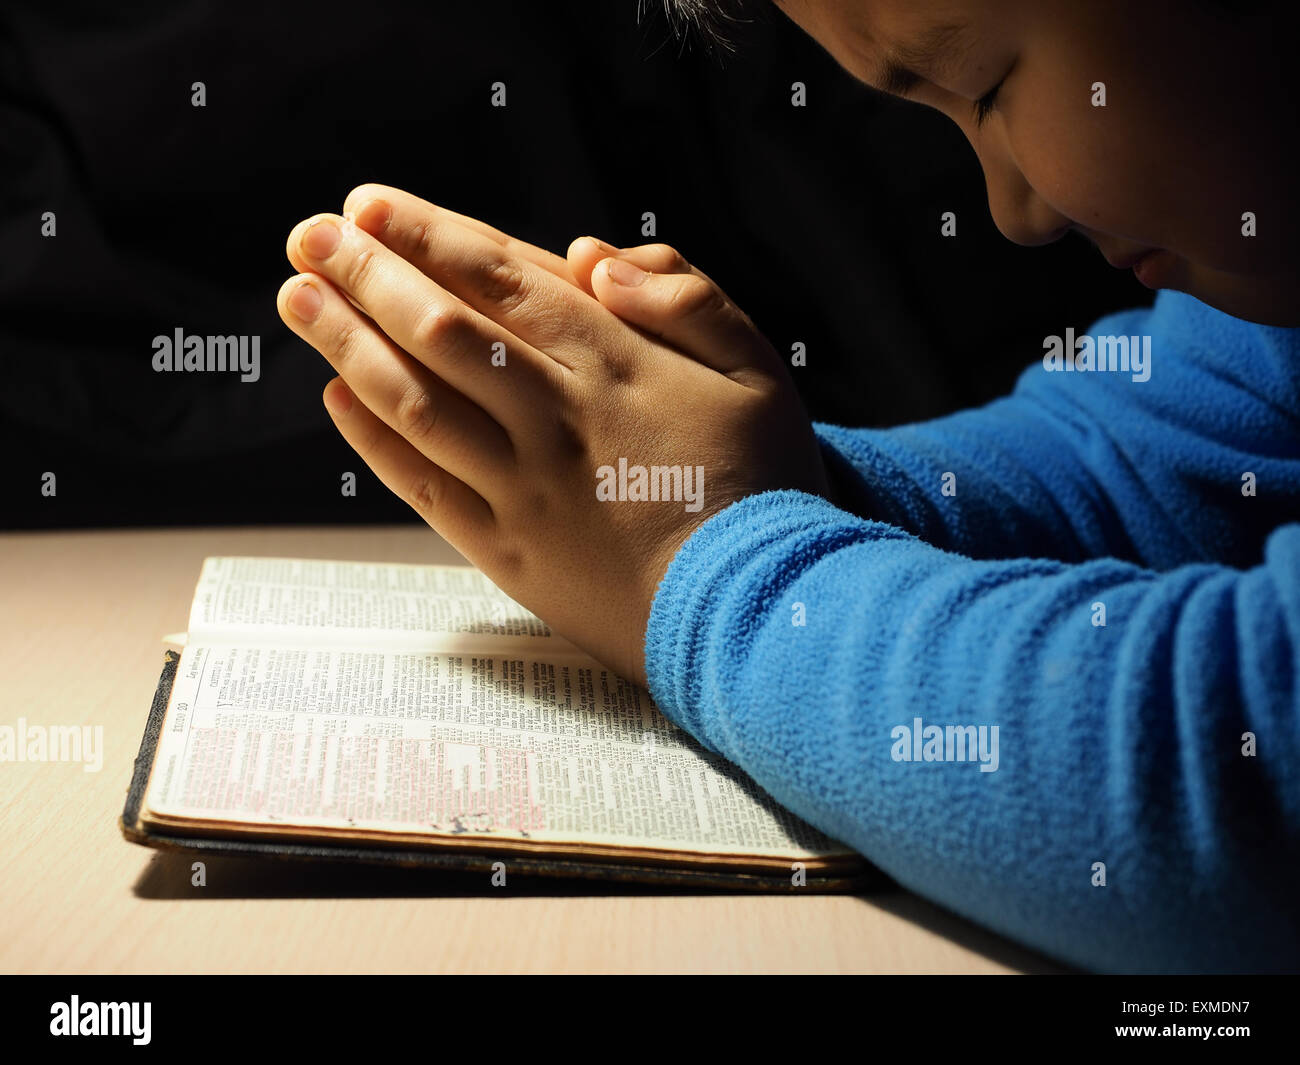 A little boy praying at home Stock Photo